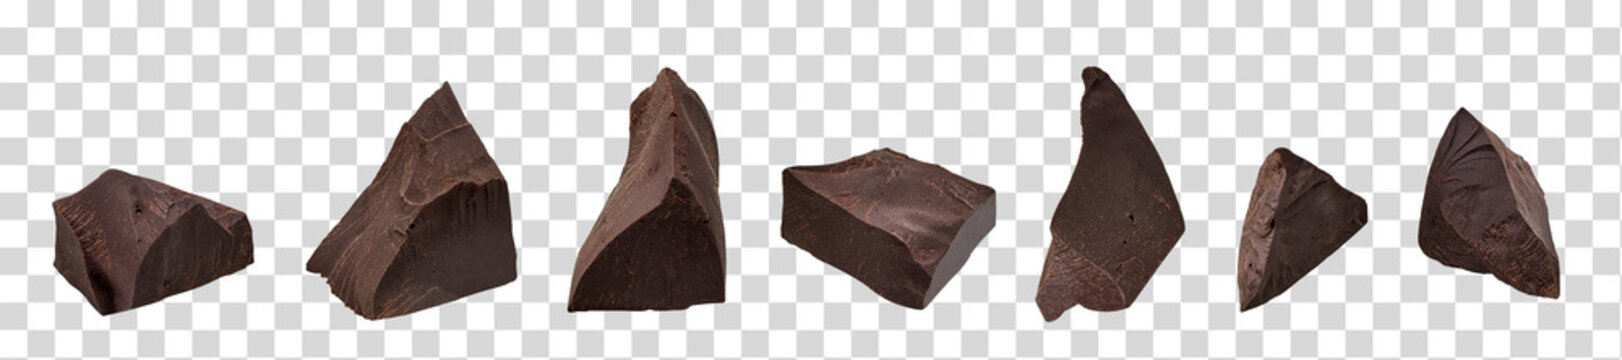 Cracked chocolates / broken chocolate chips or chocolate parts from top view on isolated background	